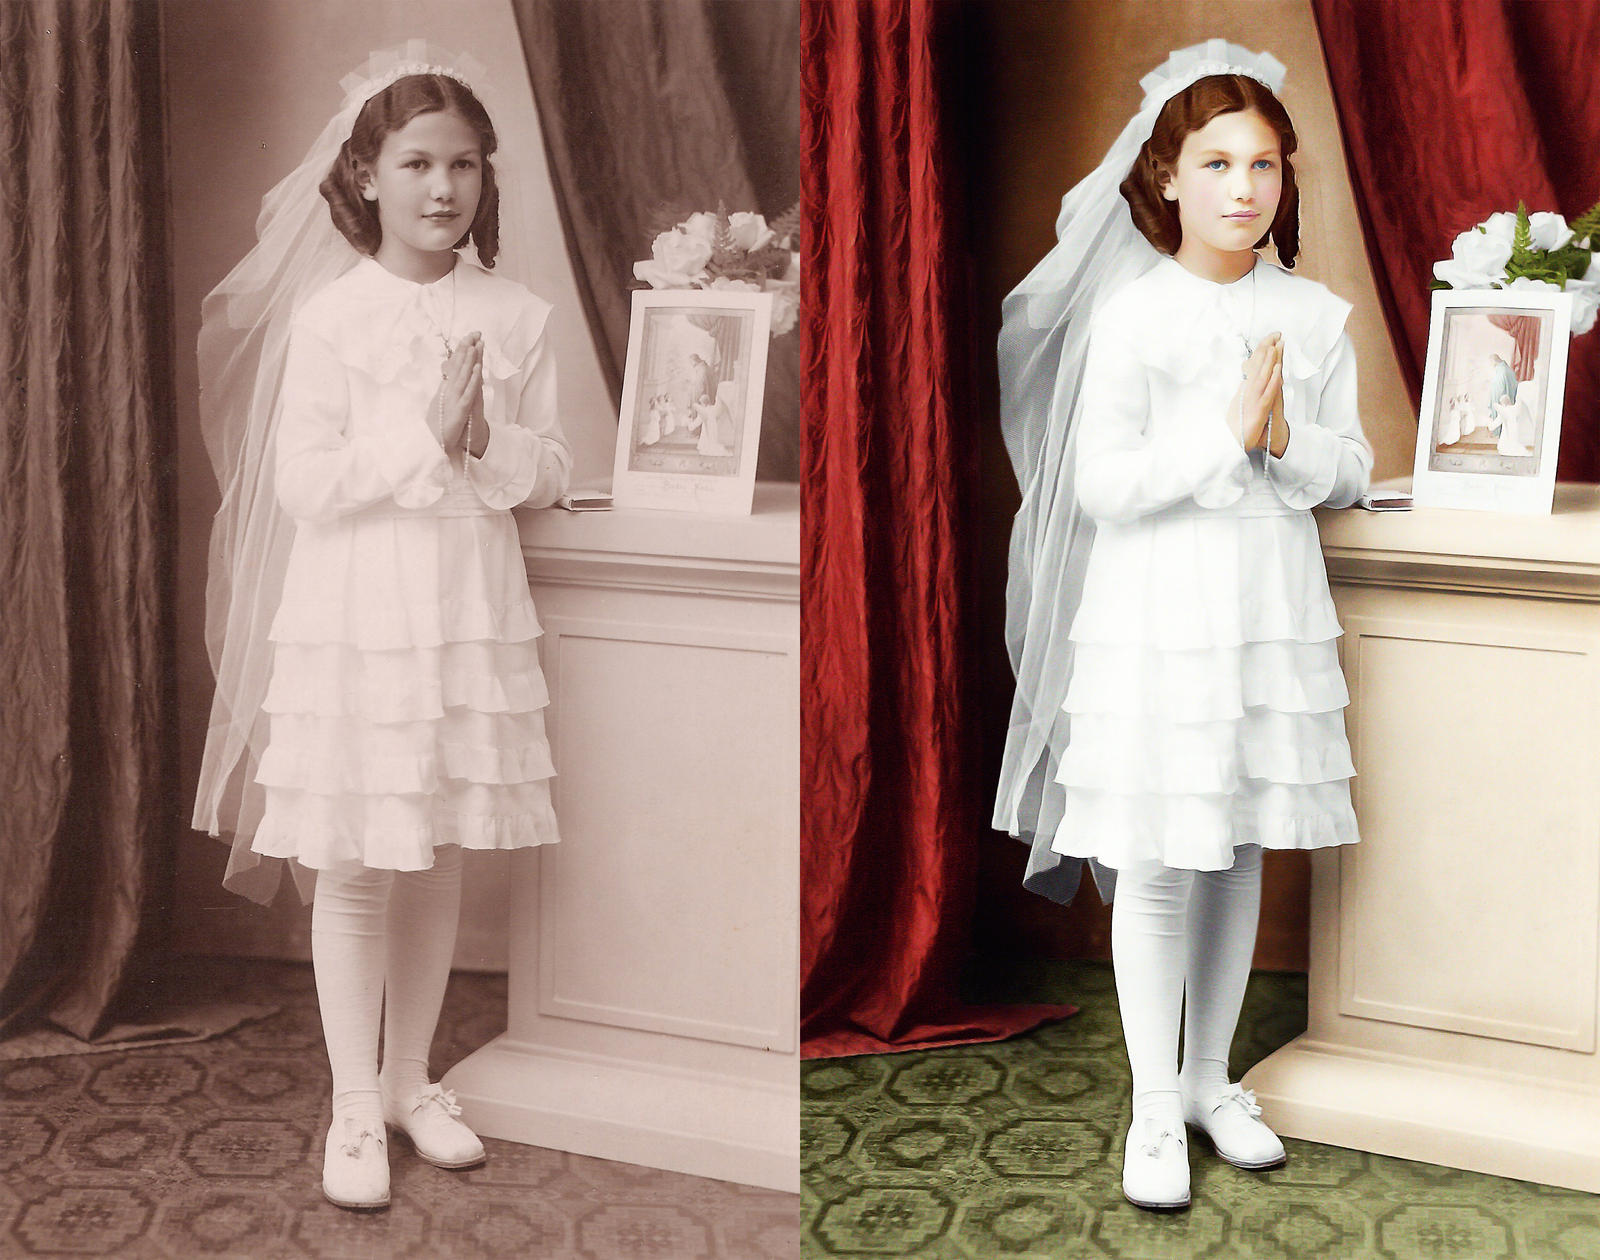 Old Photo Colorization Before and After